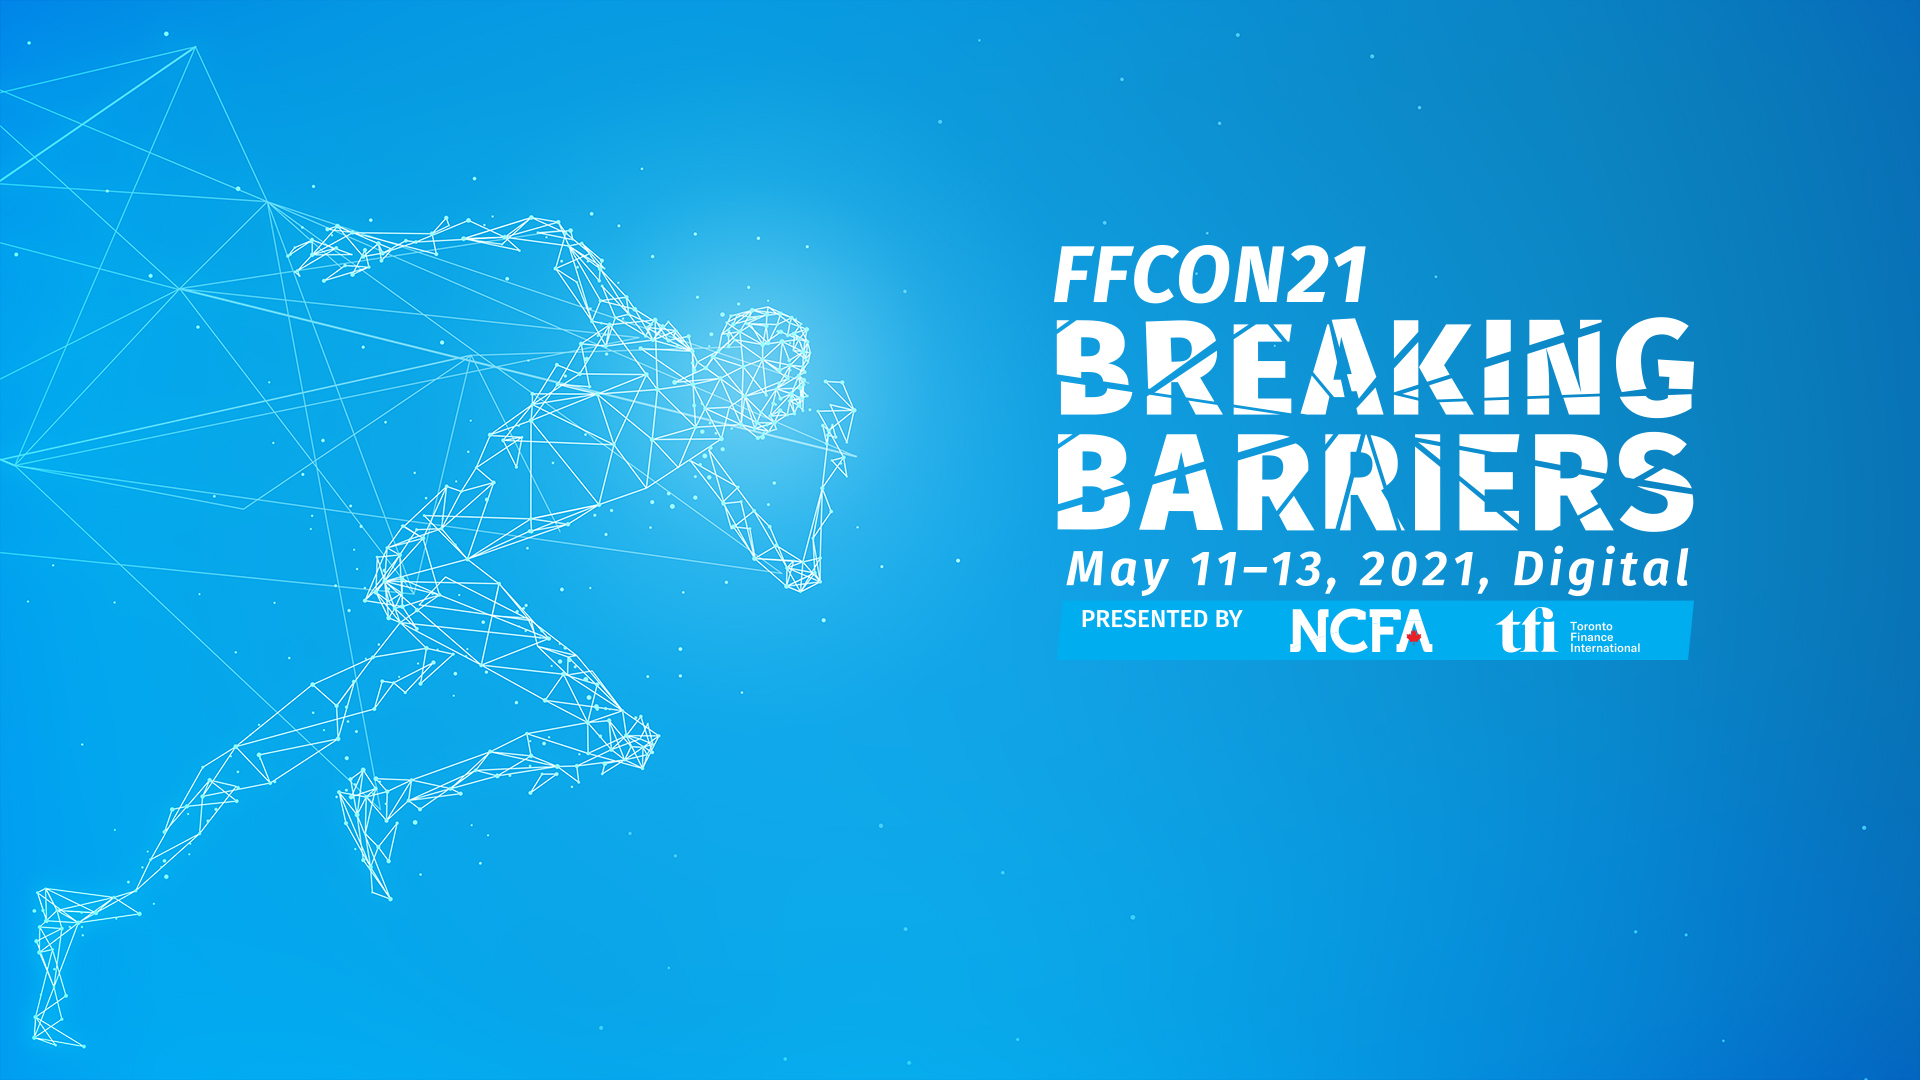 NCFA reveals speakers and agenda for Online FFCON21: Fintech and Financing Conference